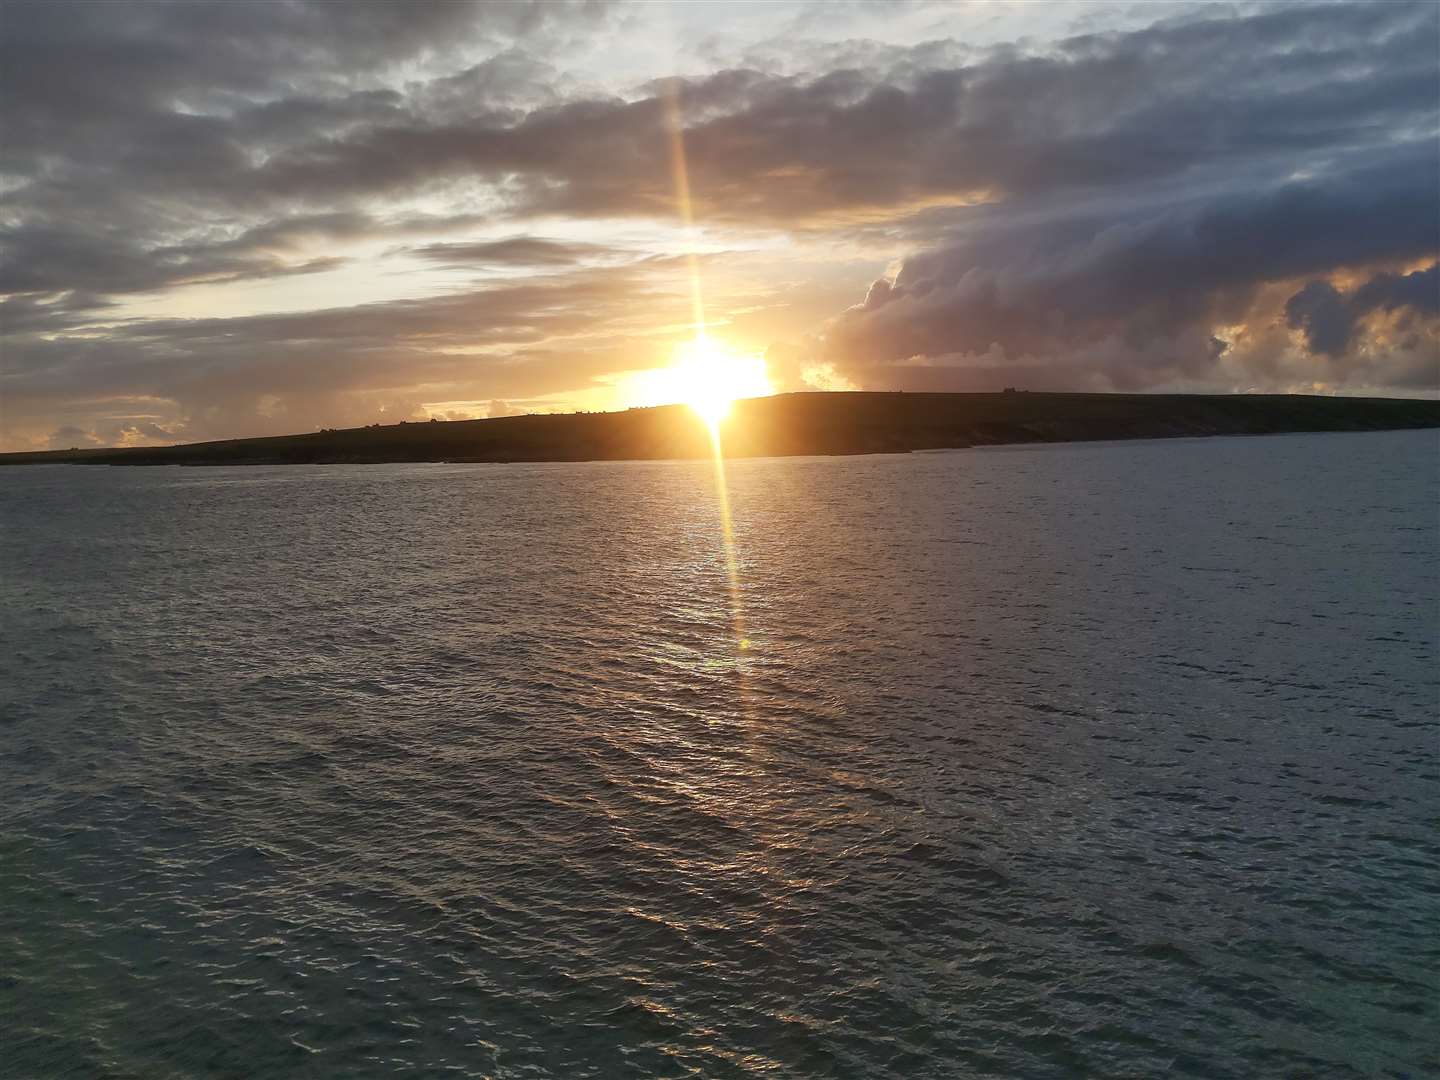 Goodbye Caithness. A dramatic sunset as we sail to Orkney.